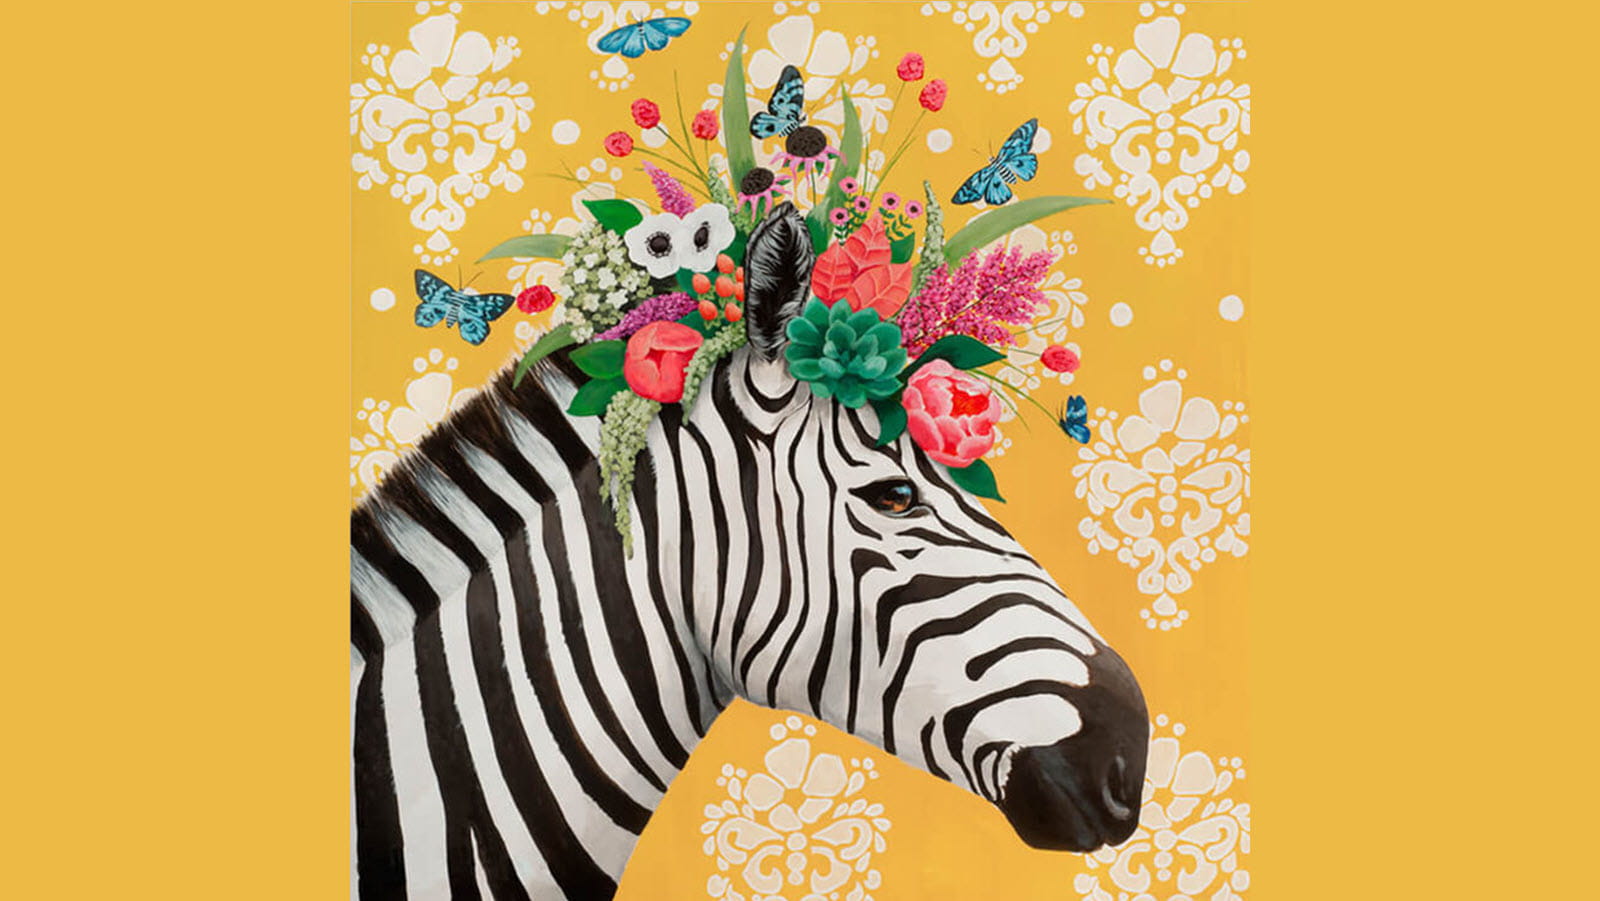 Ornate illustration of a black and white zebra wearing a crown of flowers on a yellow background. The artist is Heather Gauthier.